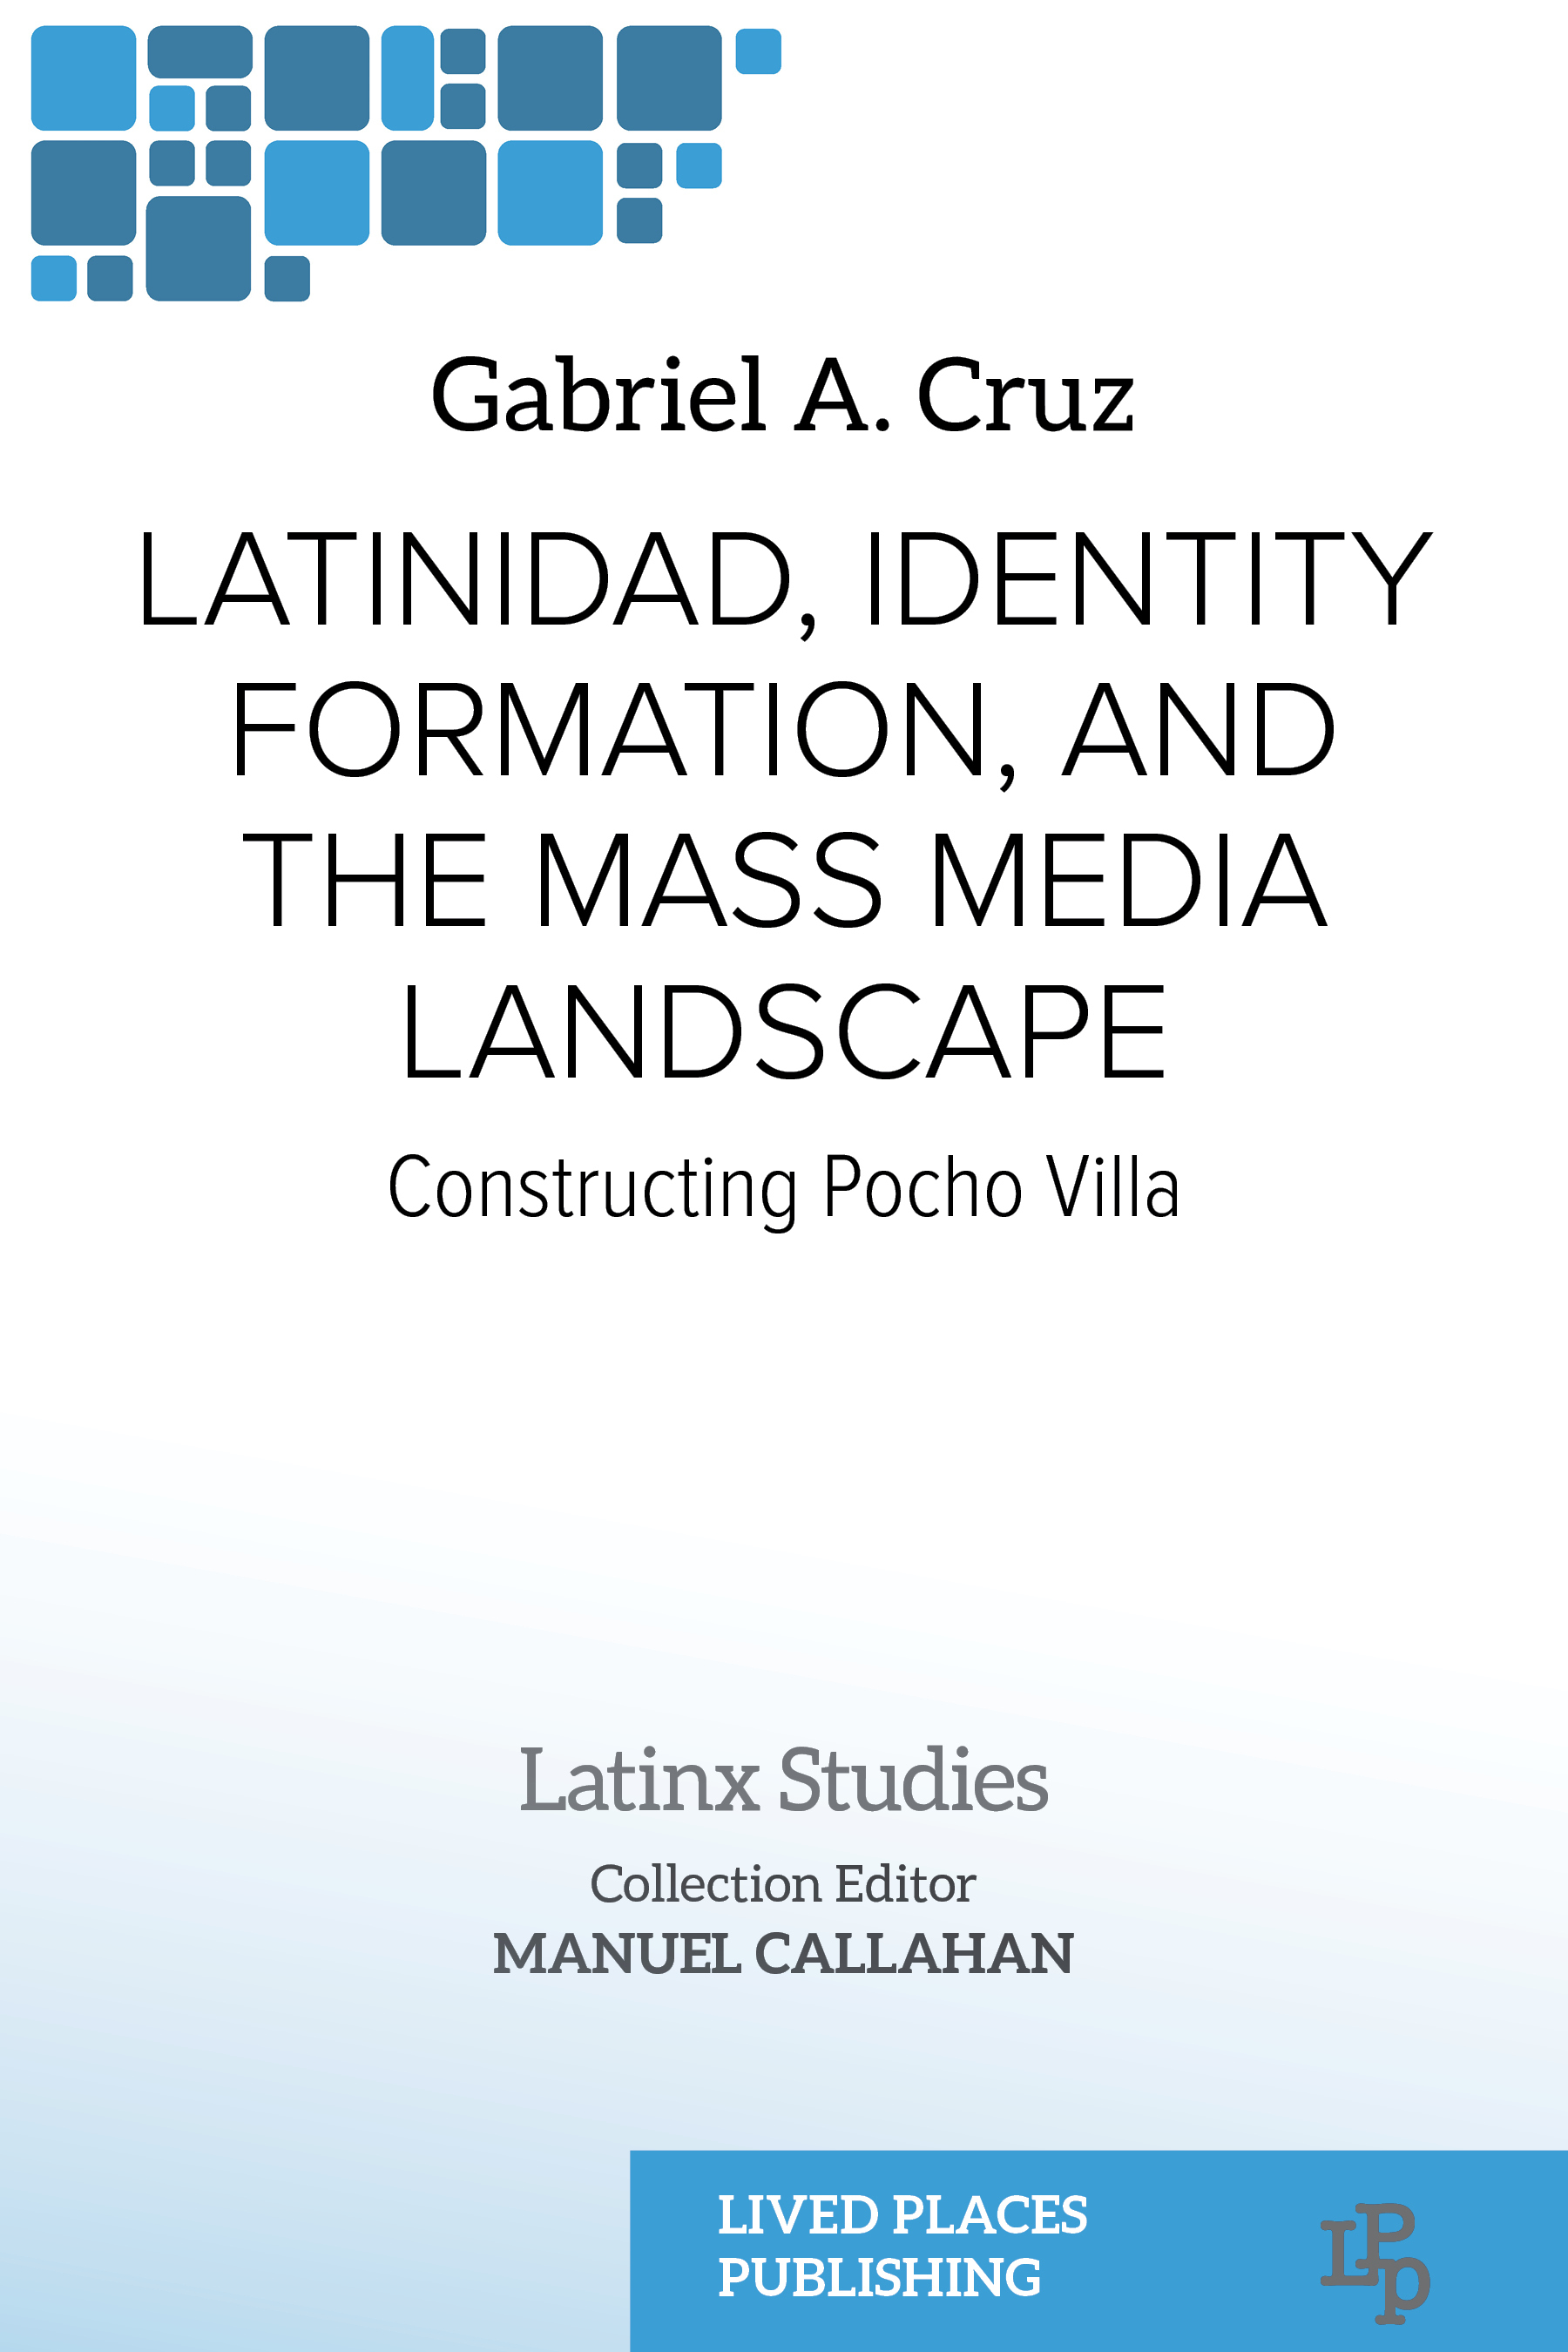 Latinidad, Identity Formation, and the Mass Media Landscape